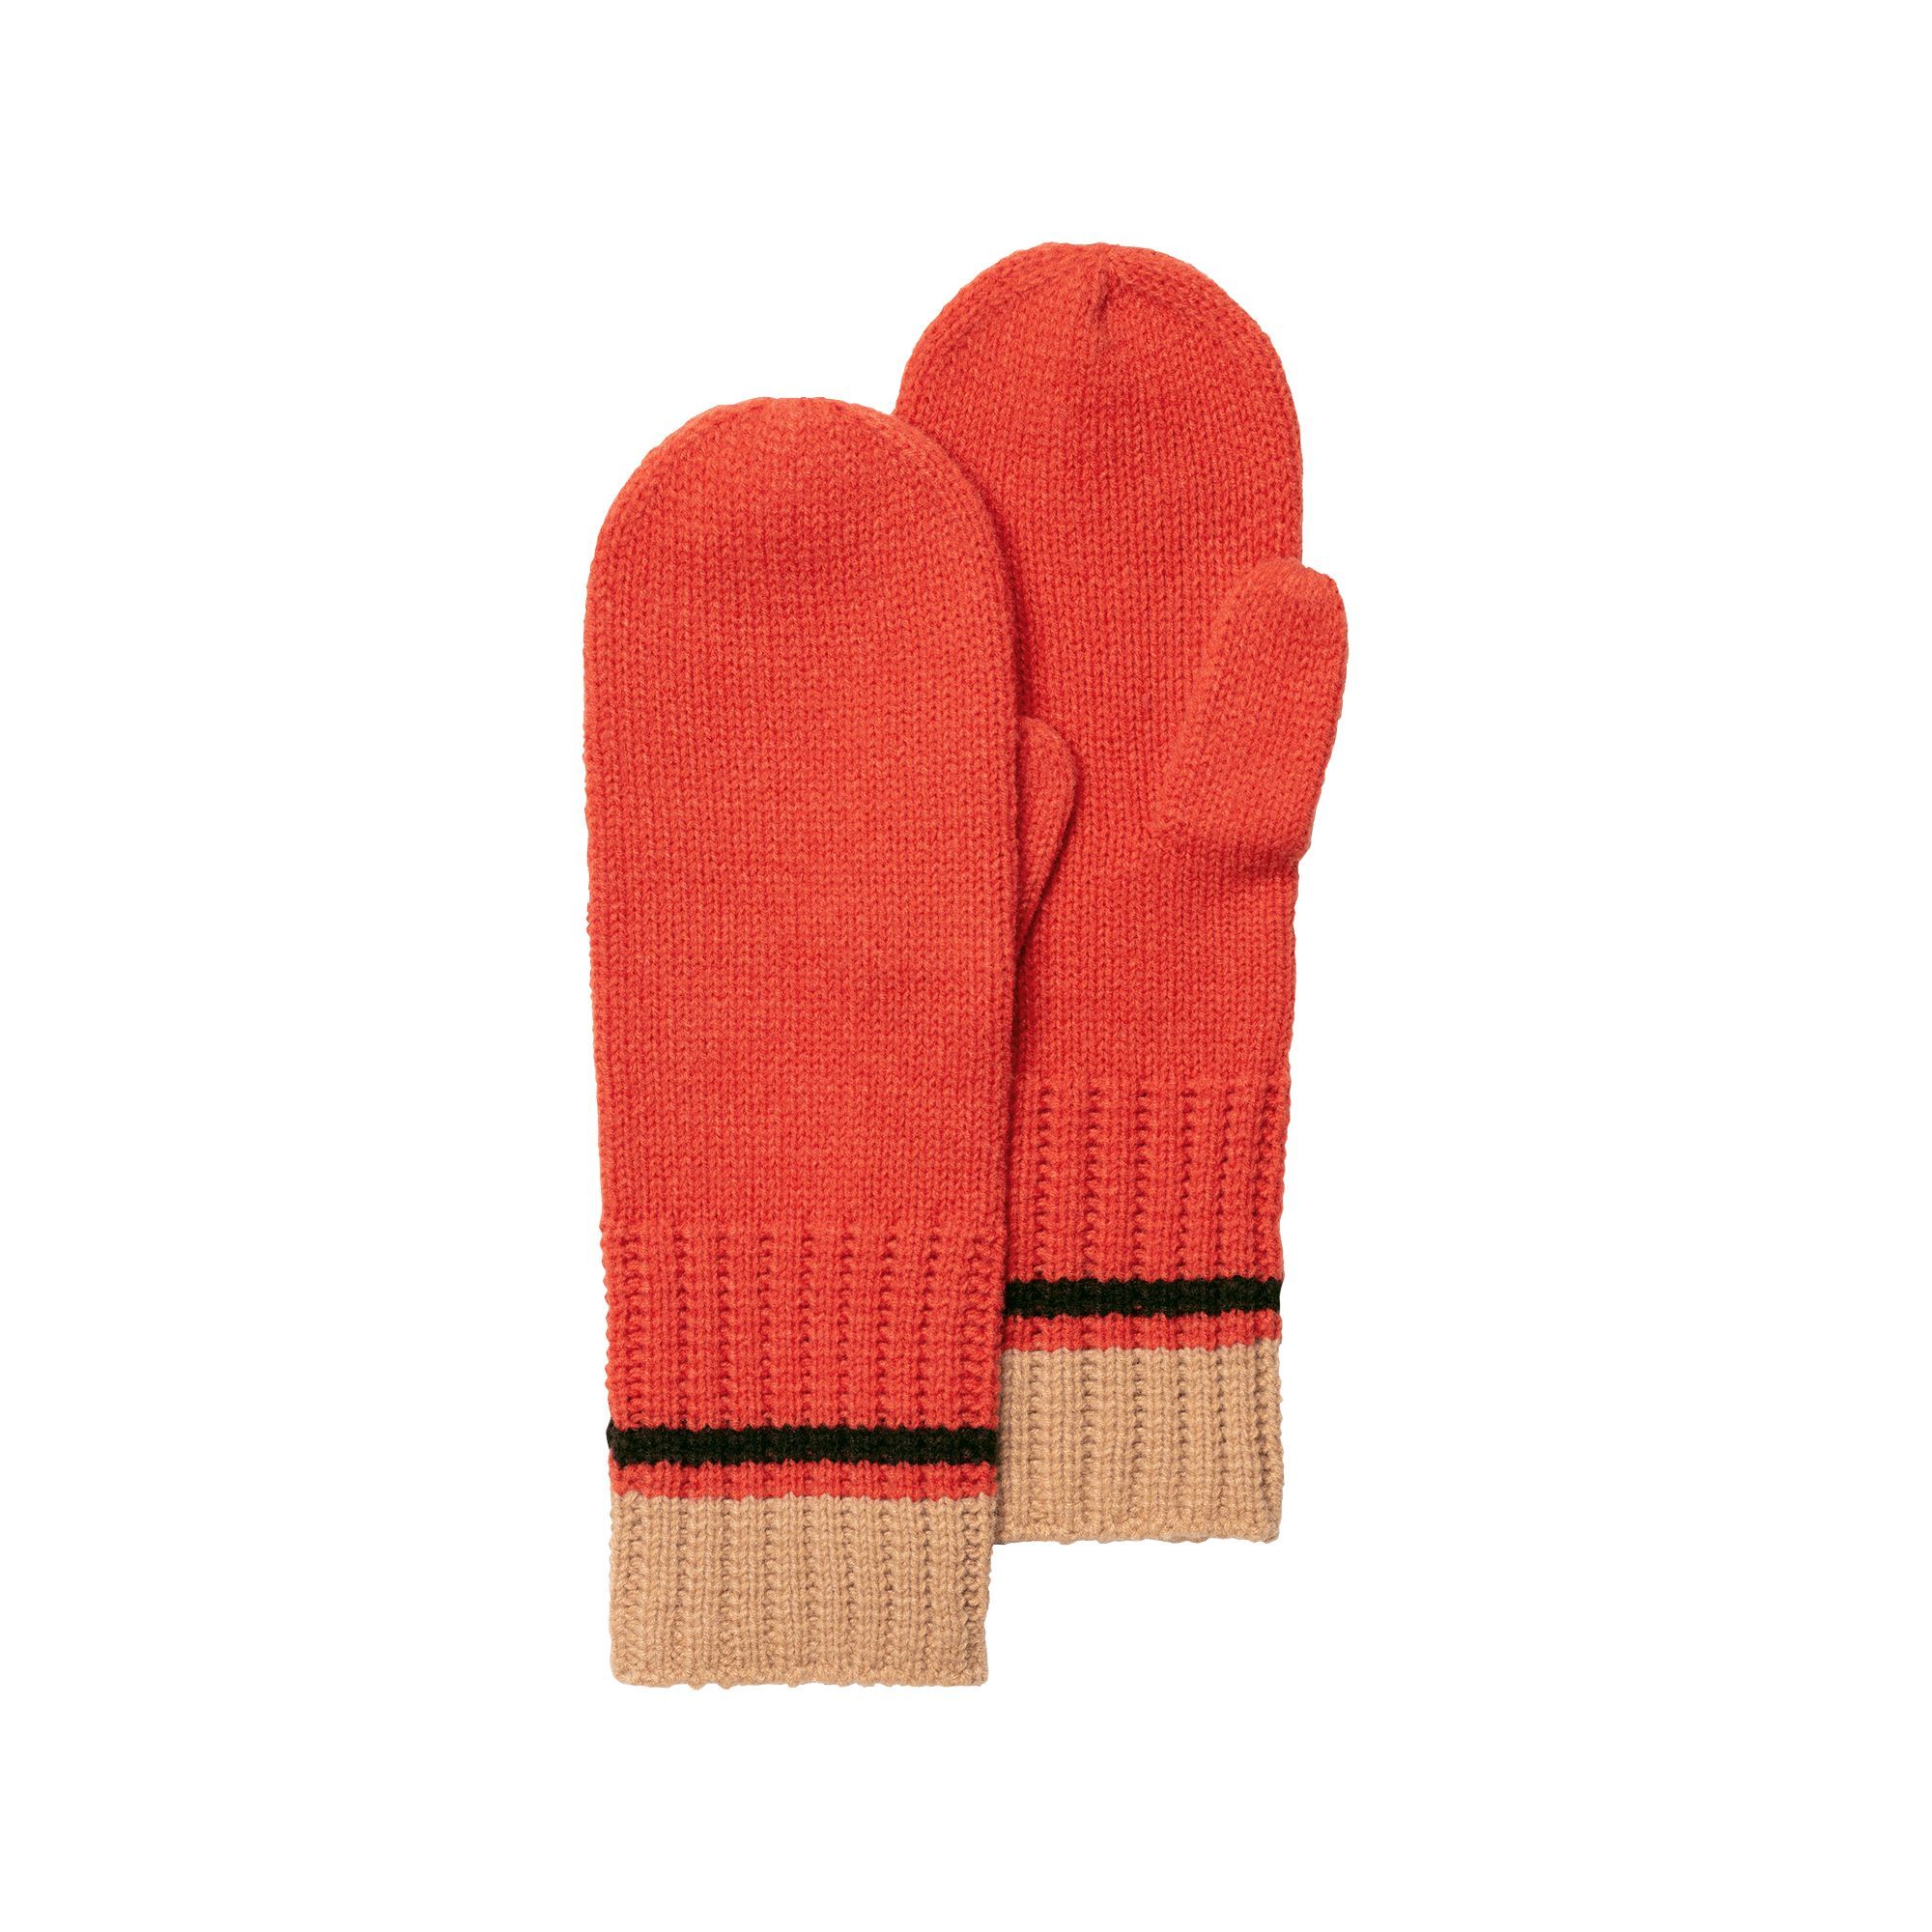 Mix Color Yarn Knitted Mitten Gloves